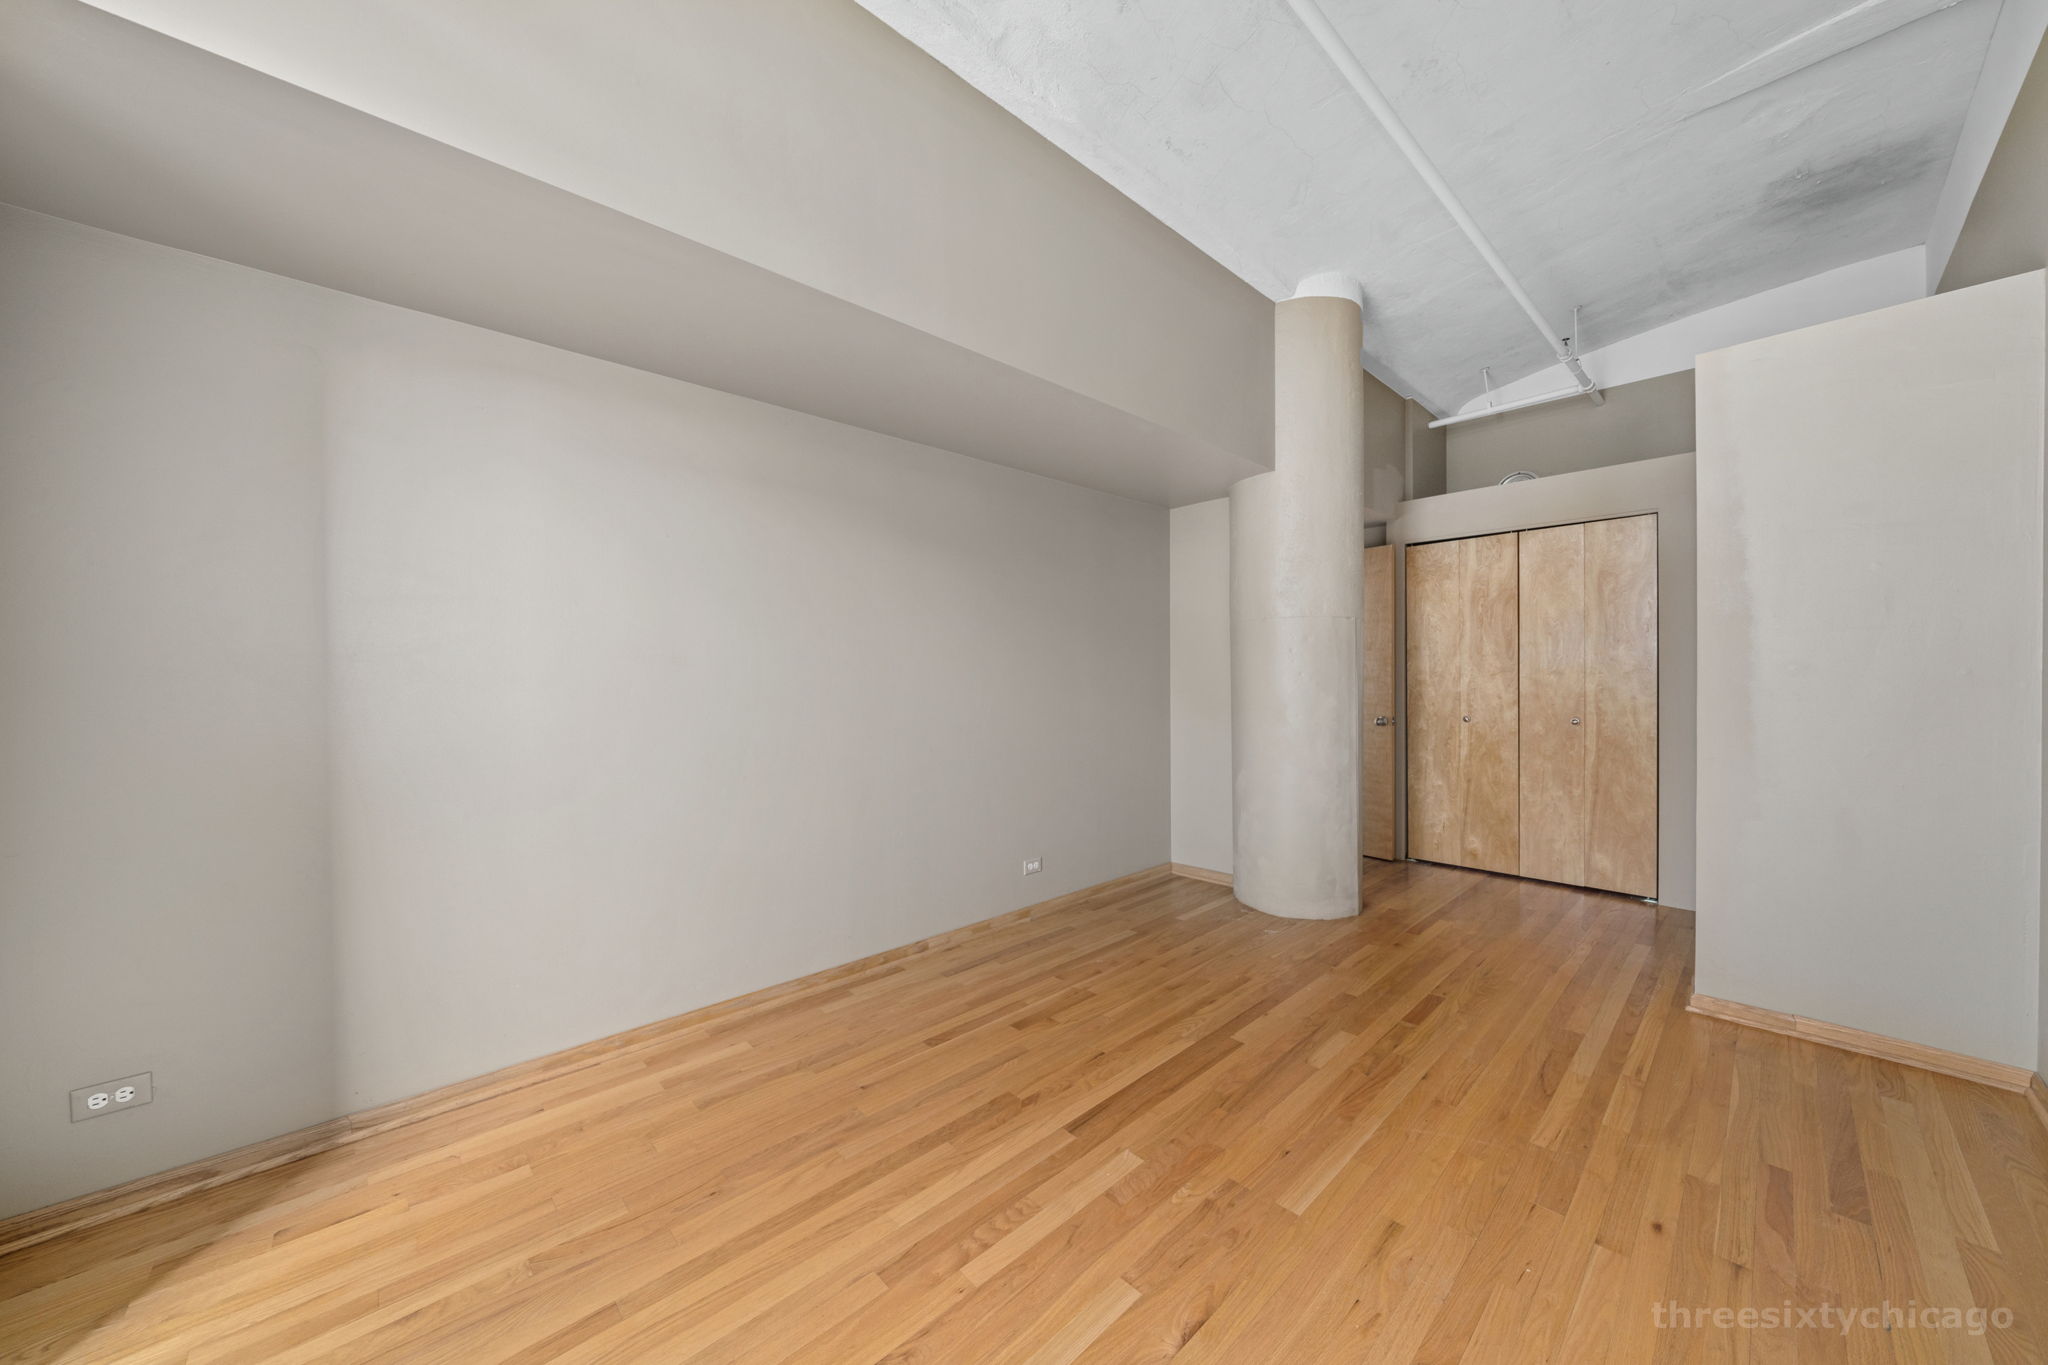  801 S Wells St 807, Chicago, IL 60607, US Photo 20